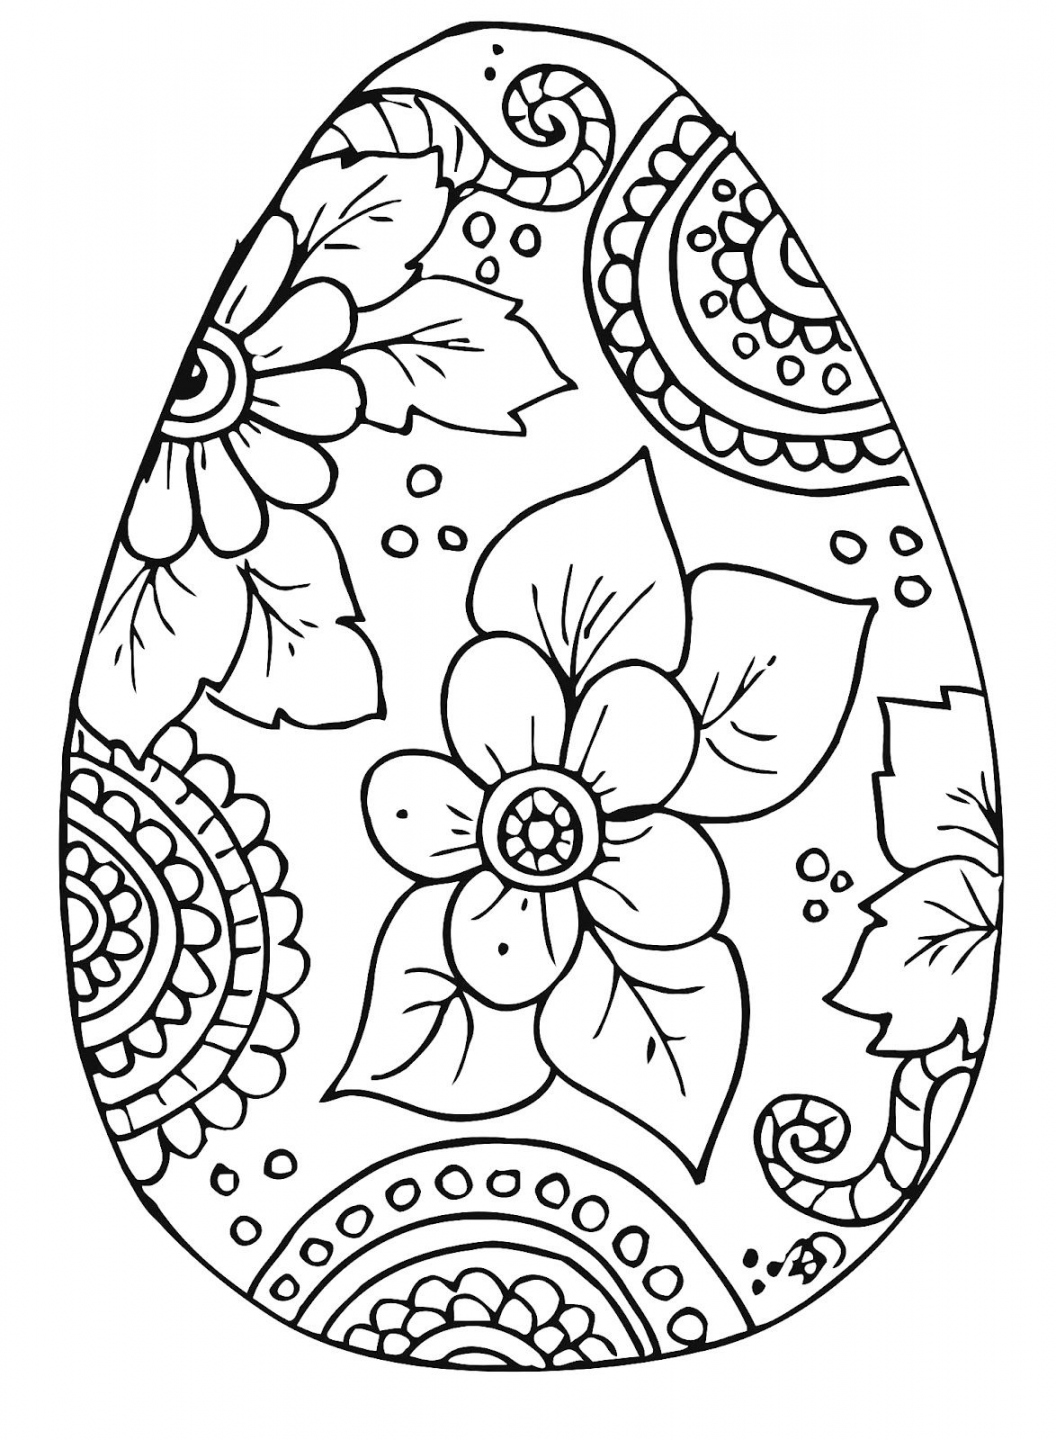 Free Printable Easter Coloring Pages - Printable - B.D